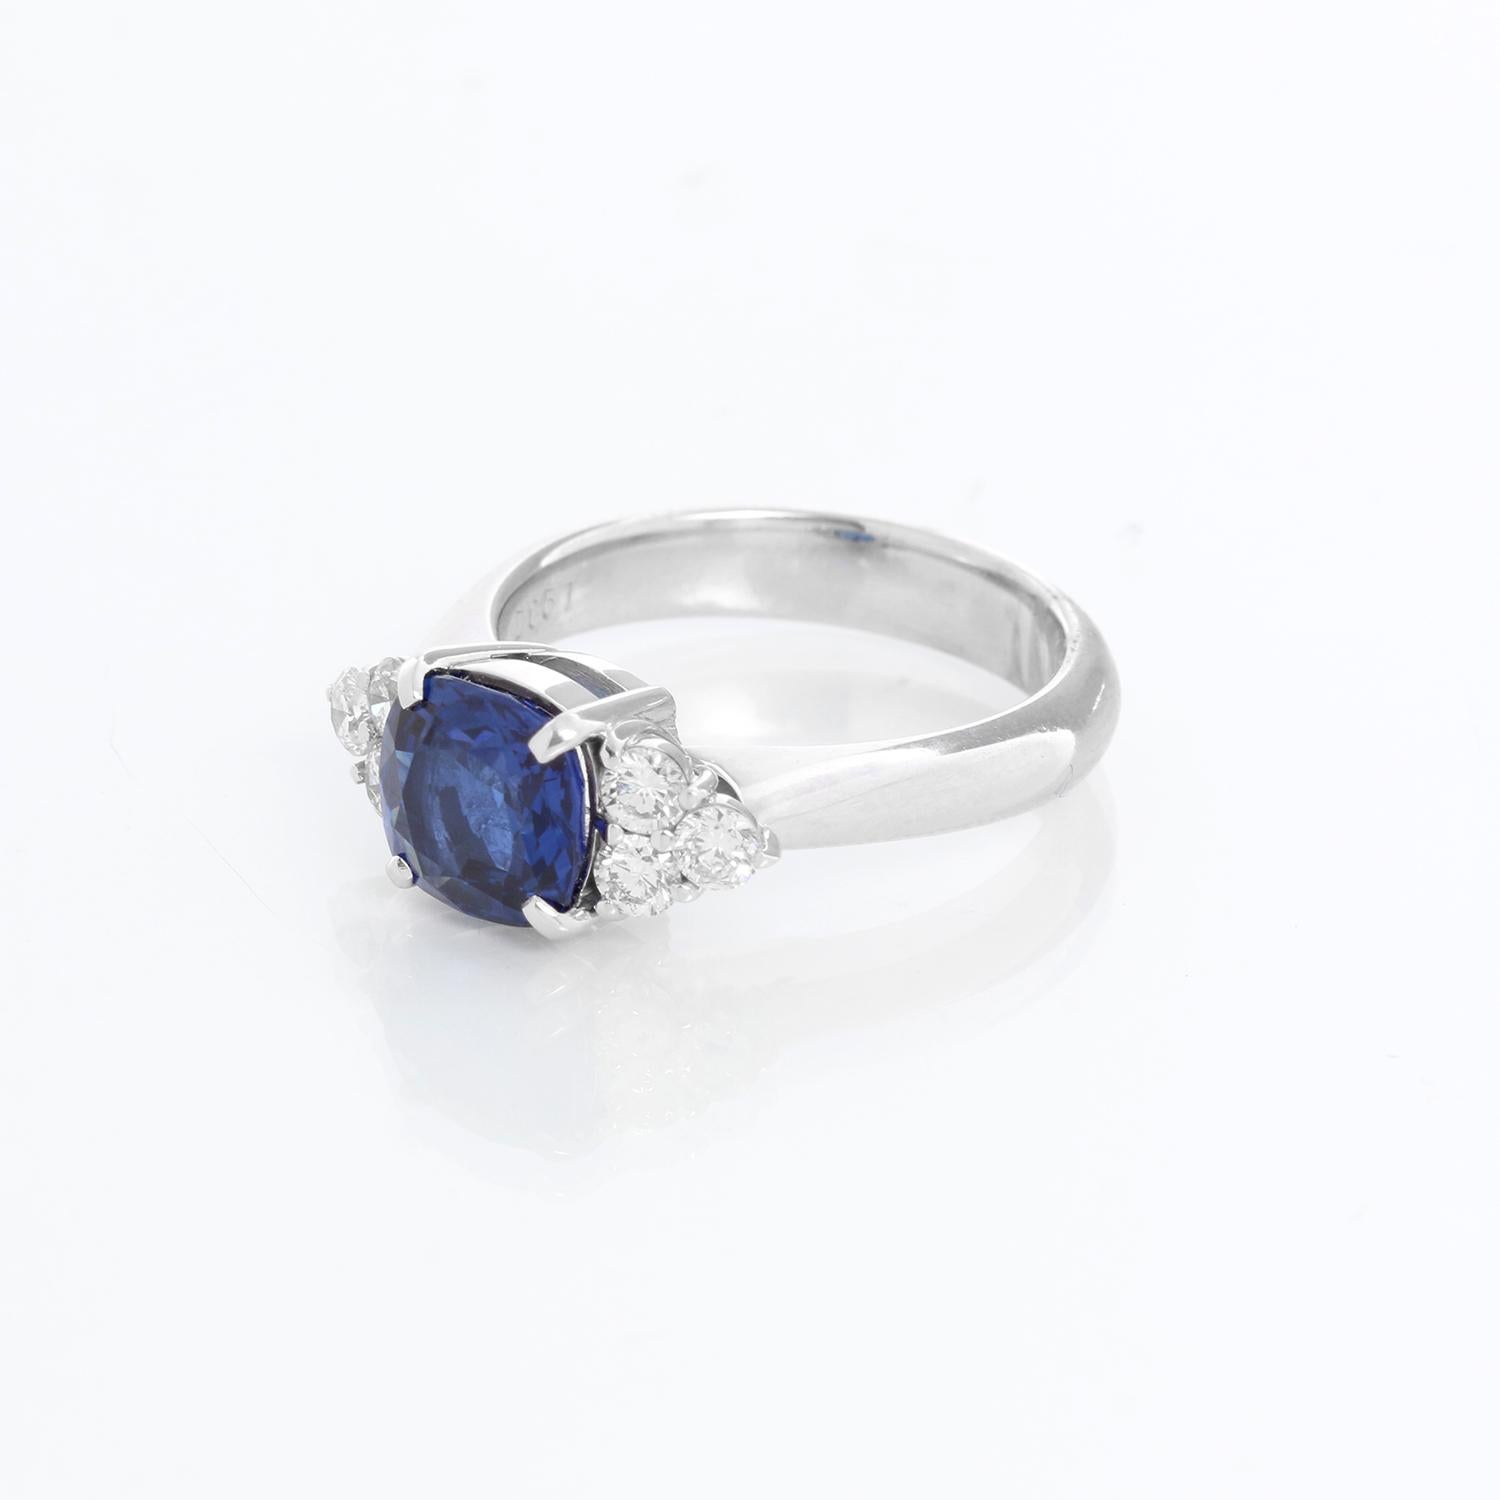 Platinum Sapphire and Diamond Ring Size 7 1/4 - Cushion shaped Sapphire weighing 2.34 cts. surrounded by .51 cts of diamond set in platinum. Total weight 9.2 grams. Hallmarked .